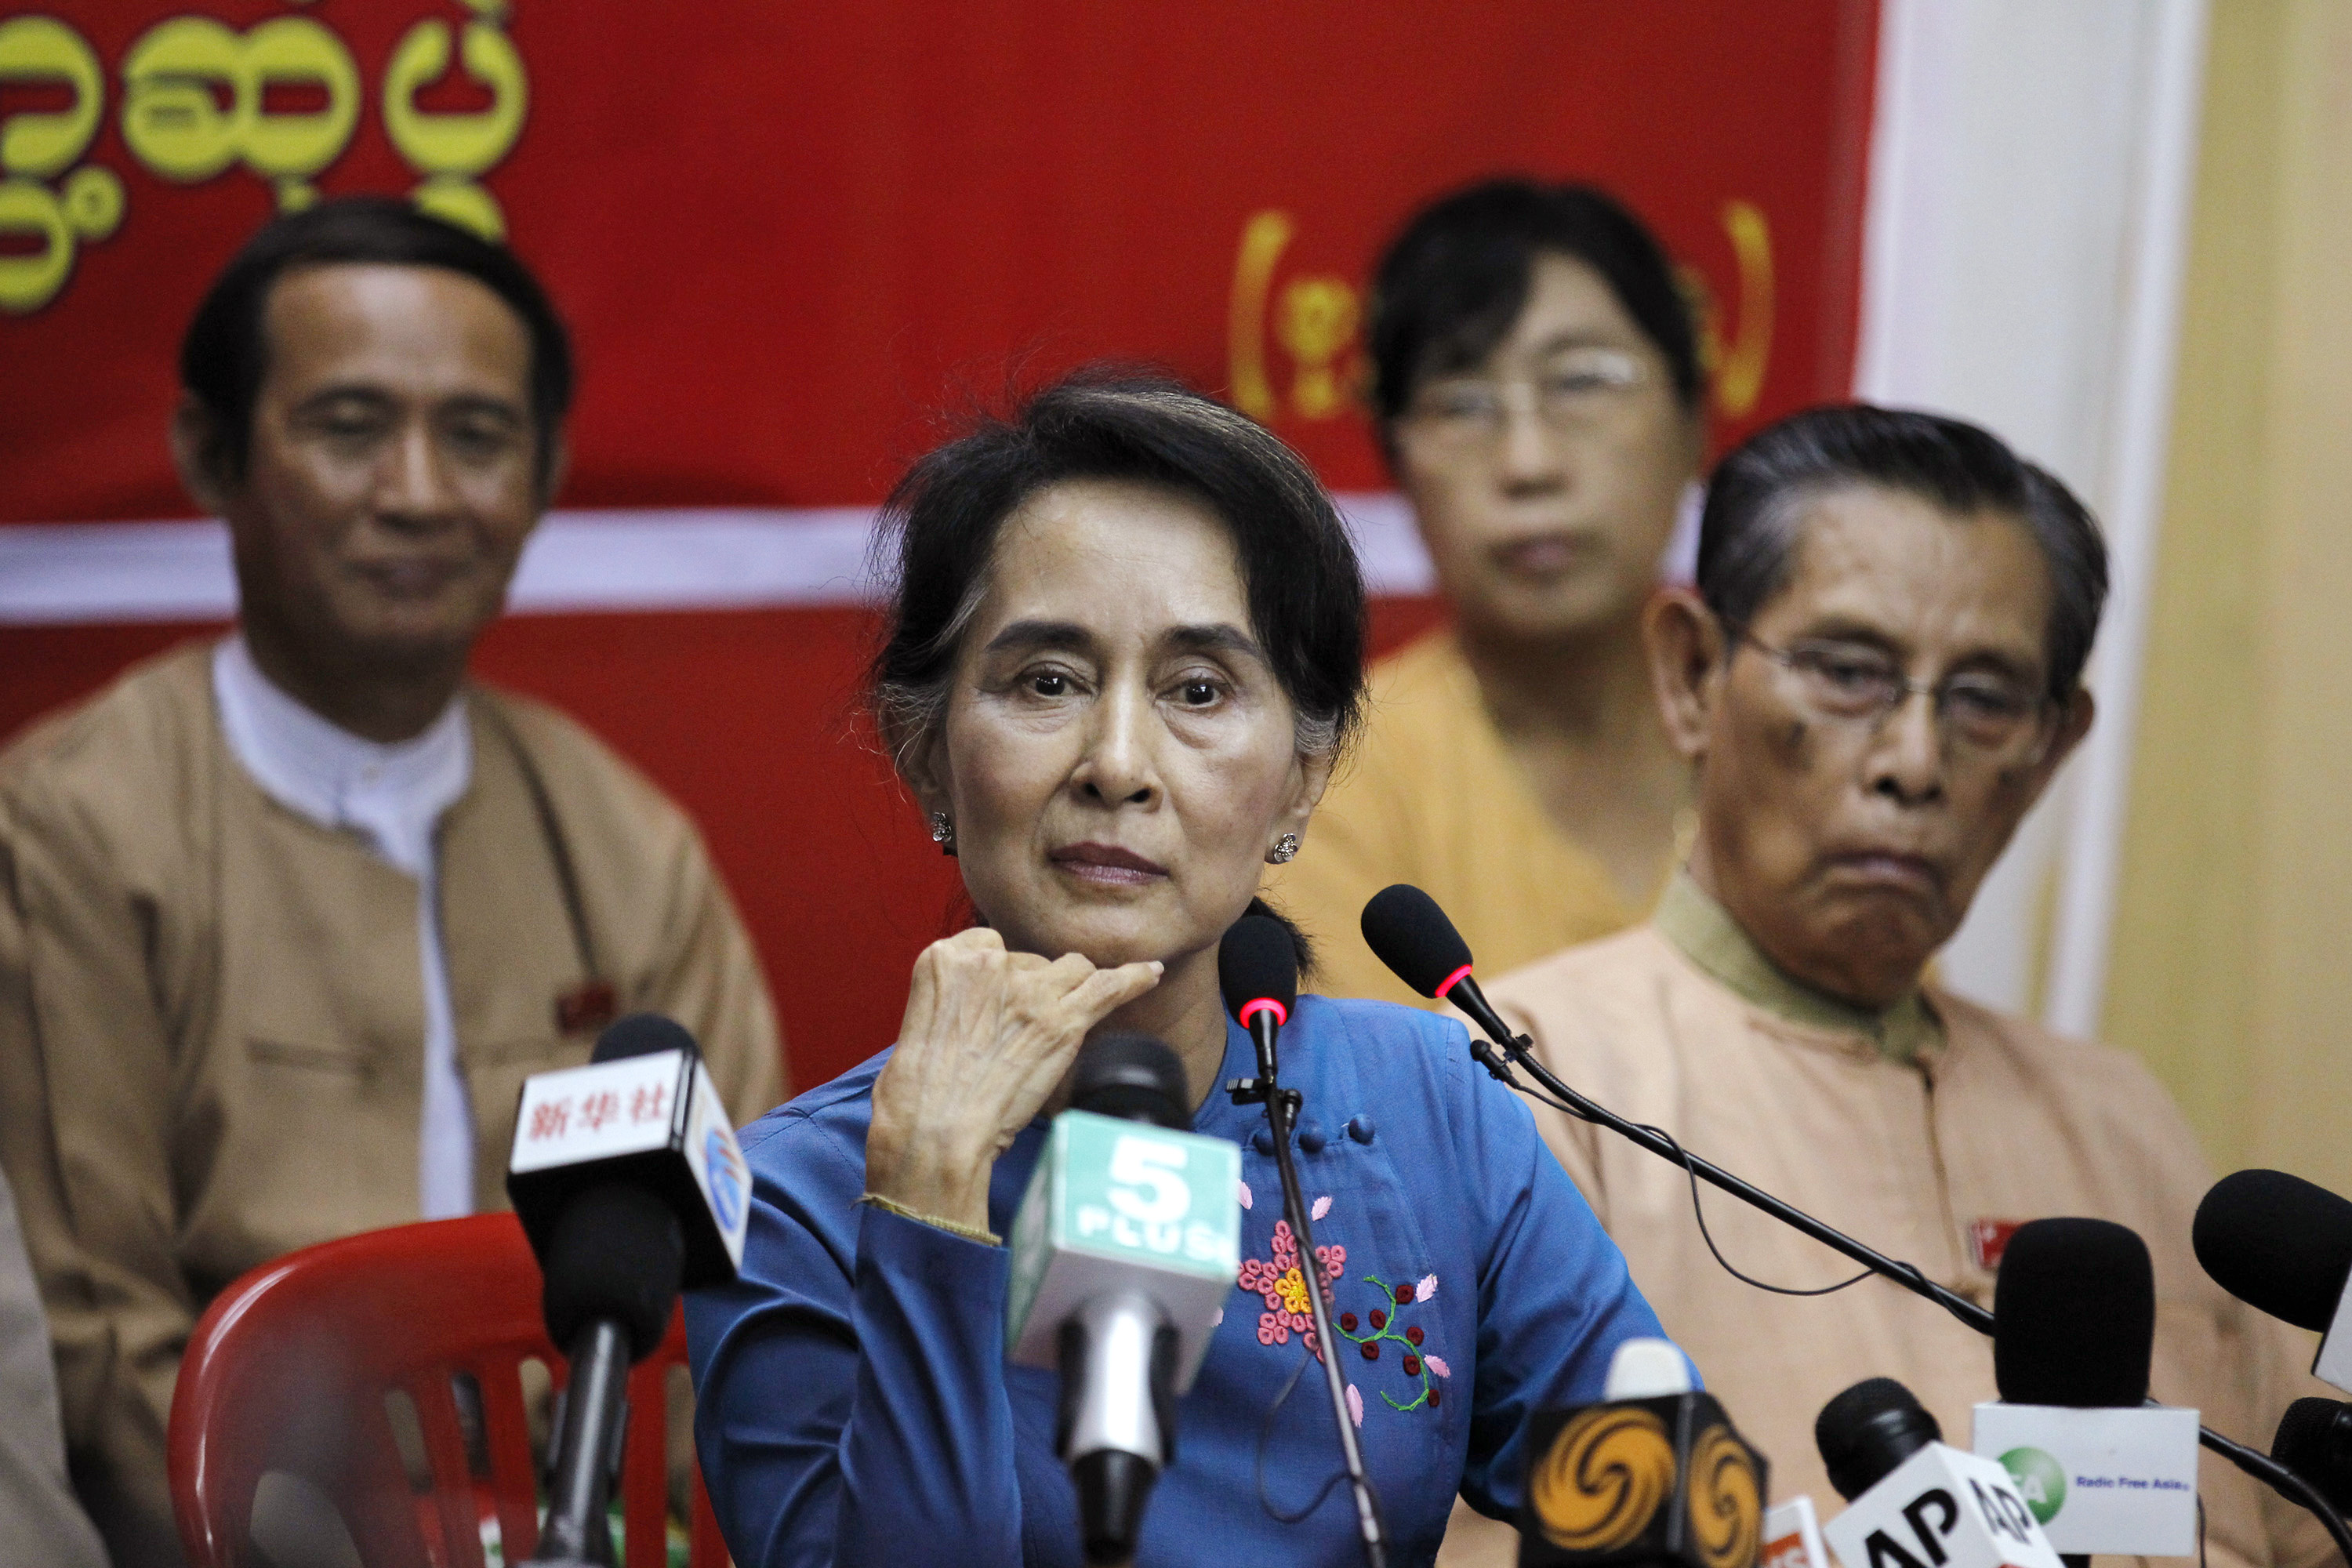 Myanmar's pro-democracy leader Aung San Suu Kyi listens as reporter asks her a question during a news conference at the National League for Democracy party head office in Rangoon on Nov. 5, 2014 (Soe Zeya Tun—Reuters)